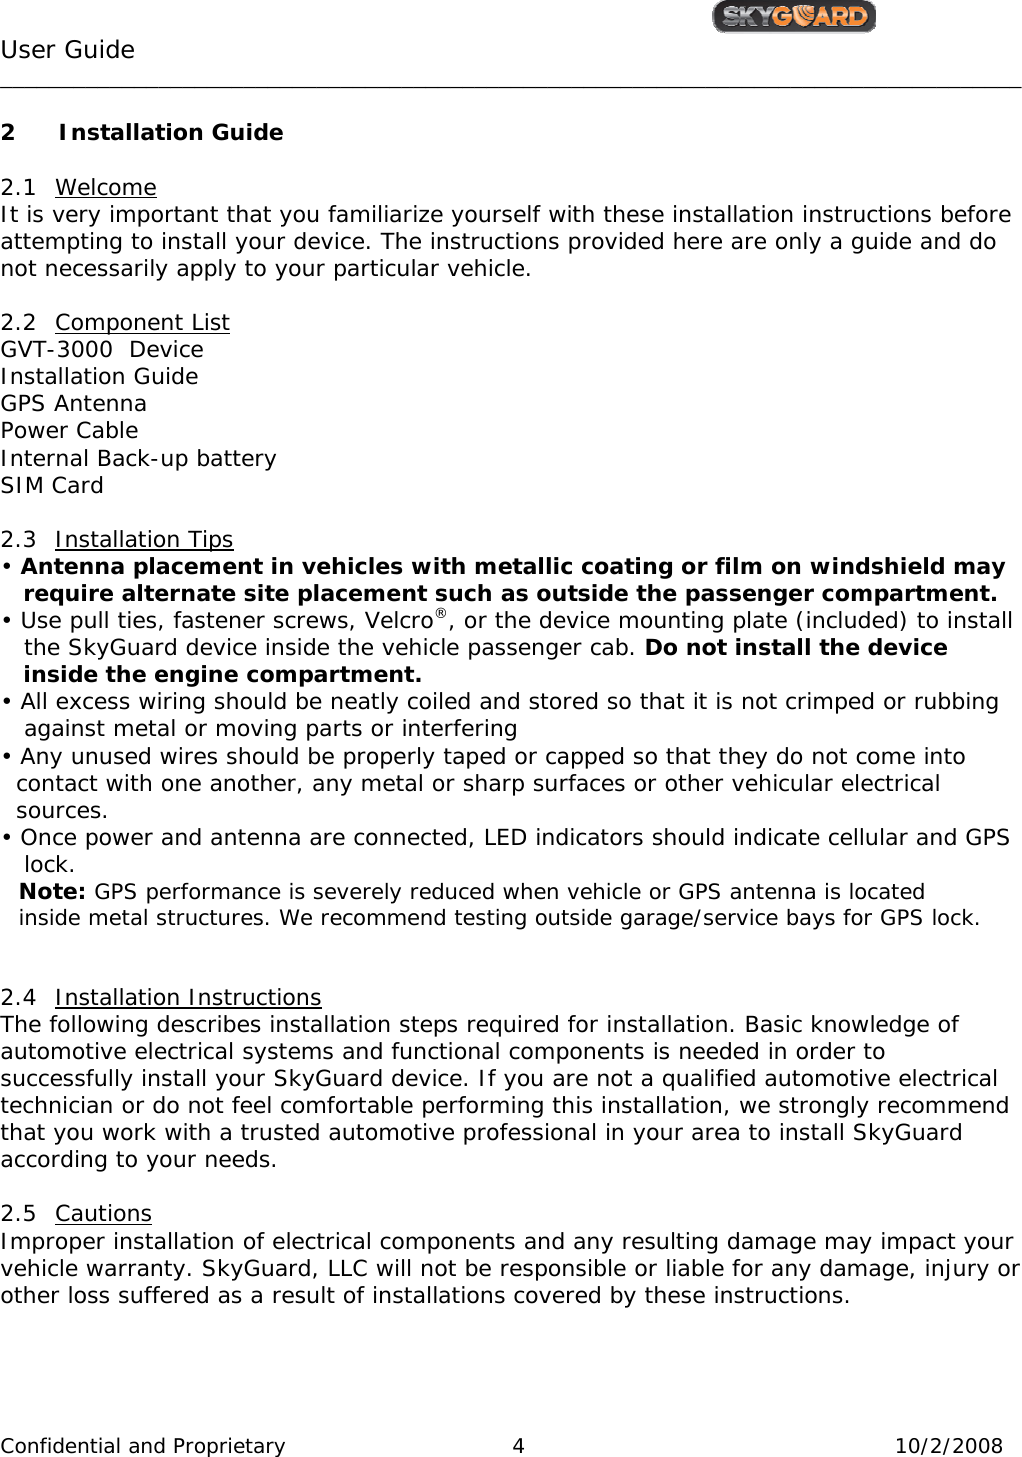                                                   User Guide                                         ____________________________________________________________________________________ Confidential and Proprietary     4  10/2/2008  2 Installation Guide  2.1 Welcome It is very important that you familiarize yourself with these installation instructions before  attempting to install your device. The instructions provided here are only a guide and do not necessarily apply to your particular vehicle.  2.2 Component List GVT-3000  Device Installation Guide GPS Antenna Power Cable Internal Back-up battery SIM Card  2.3 Installation Tips • Antenna placement in vehicles with metallic coating or film on windshield may    require alternate site placement such as outside the passenger compartment. • Use pull ties, fastener screws, Velcro®, or the device mounting plate (included) to install    the SkyGuard device inside the vehicle passenger cab. Do not install the device     inside the engine compartment. • All excess wiring should be neatly coiled and stored so that it is not crimped or rubbing     against metal or moving parts or interfering  • Any unused wires should be properly taped or capped so that they do not come into    contact with one another, any metal or sharp surfaces or other vehicular electrical    sources. • Once power and antenna are connected, LED indicators should indicate cellular and GPS     lock.  Note: GPS performance is severely reduced when vehicle or GPS antenna is located  inside metal structures. We recommend testing outside garage/service bays for GPS lock.   2.4 Installation Instructions The following describes installation steps required for installation. Basic knowledge of automotive electrical systems and functional components is needed in order to successfully install your SkyGuard device. If you are not a qualified automotive electrical technician or do not feel comfortable performing this installation, we strongly recommend that you work with a trusted automotive professional in your area to install SkyGuard according to your needs.  2.5 Cautions Improper installation of electrical components and any resulting damage may impact your vehicle warranty. SkyGuard, LLC will not be responsible or liable for any damage, injury or other loss suffered as a result of installations covered by these instructions.   